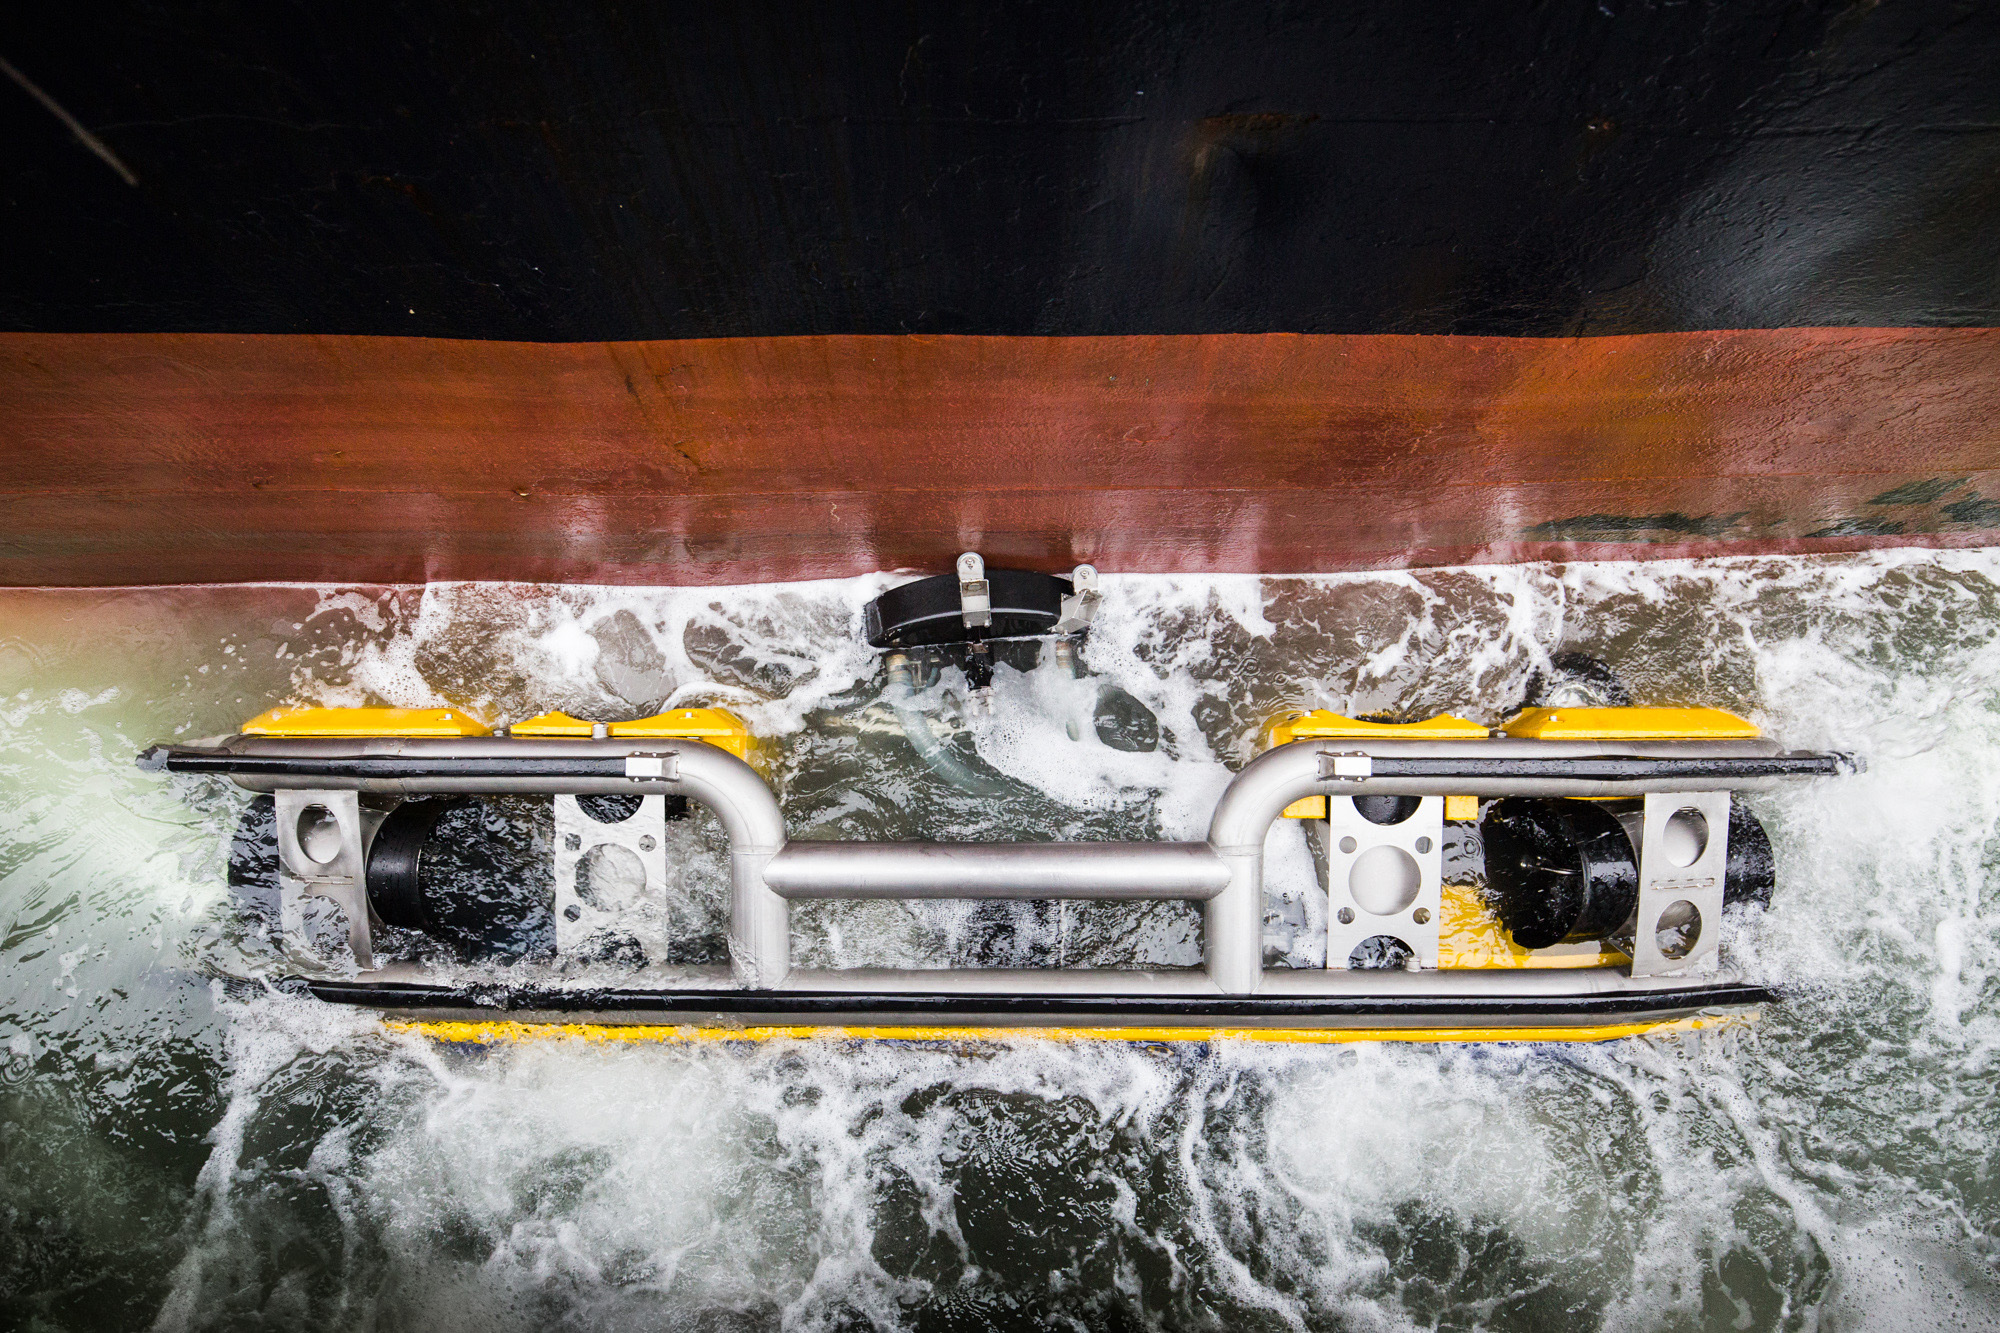 HullWiper to launch hull cleaning operations in Qatar